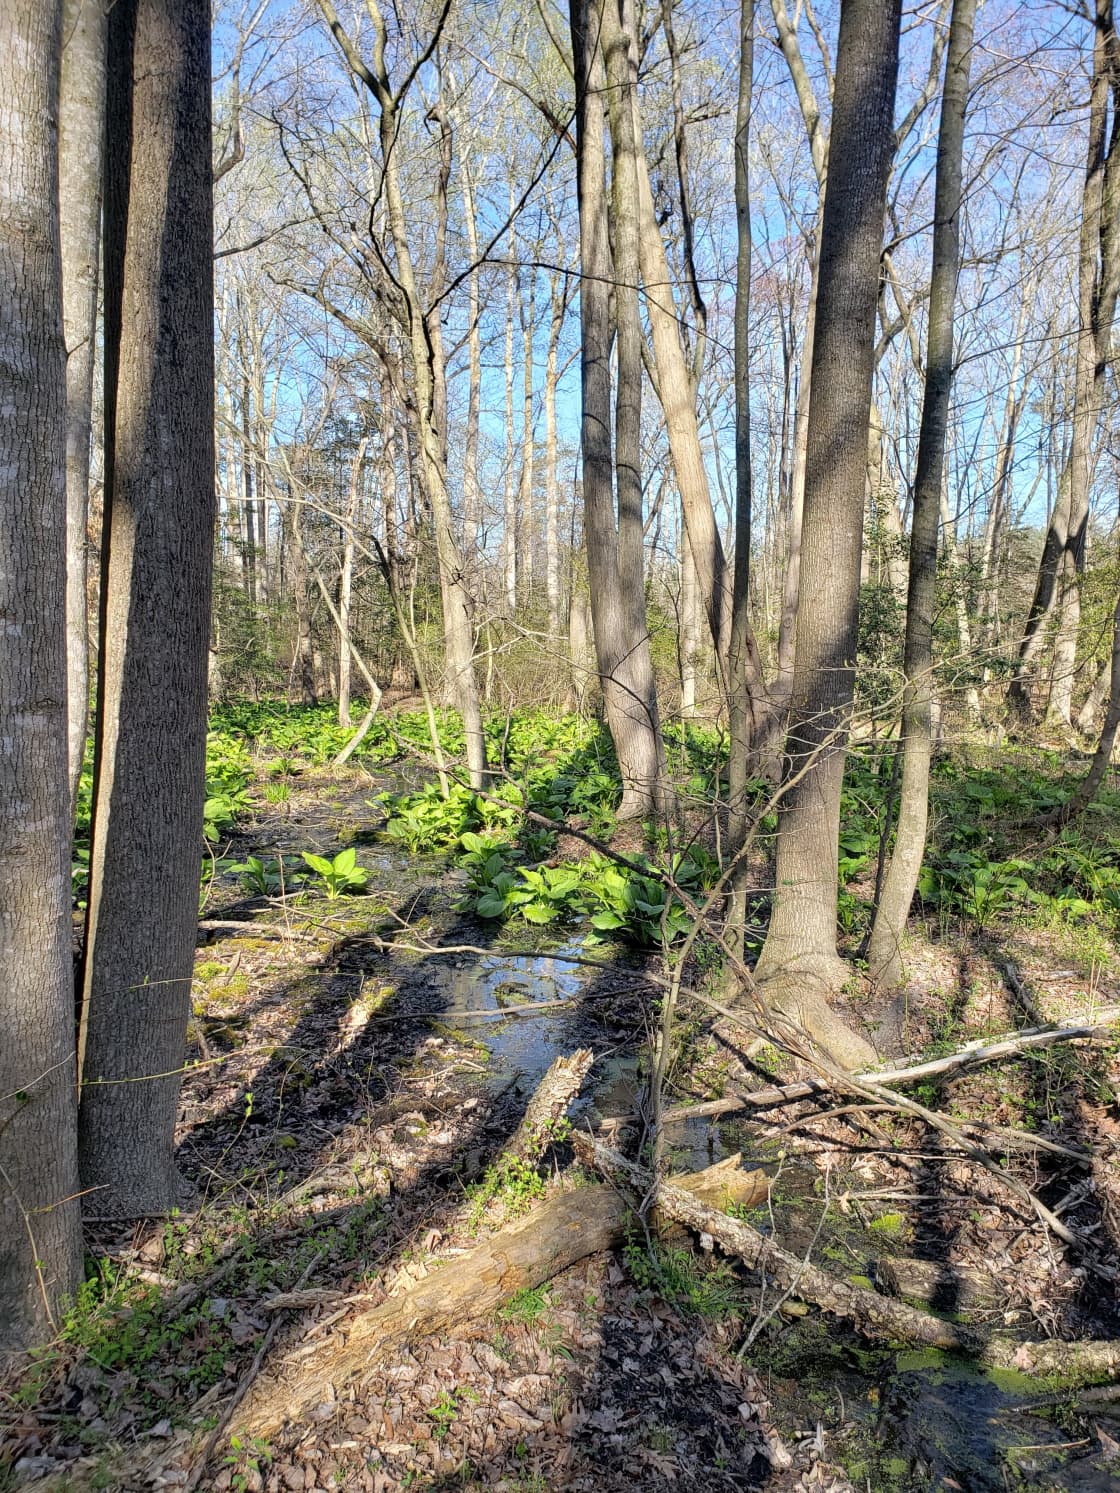 A short walk from the RV space is some beautiful woodland scenes including this bit of wetland with skunk cabbage in the spring.